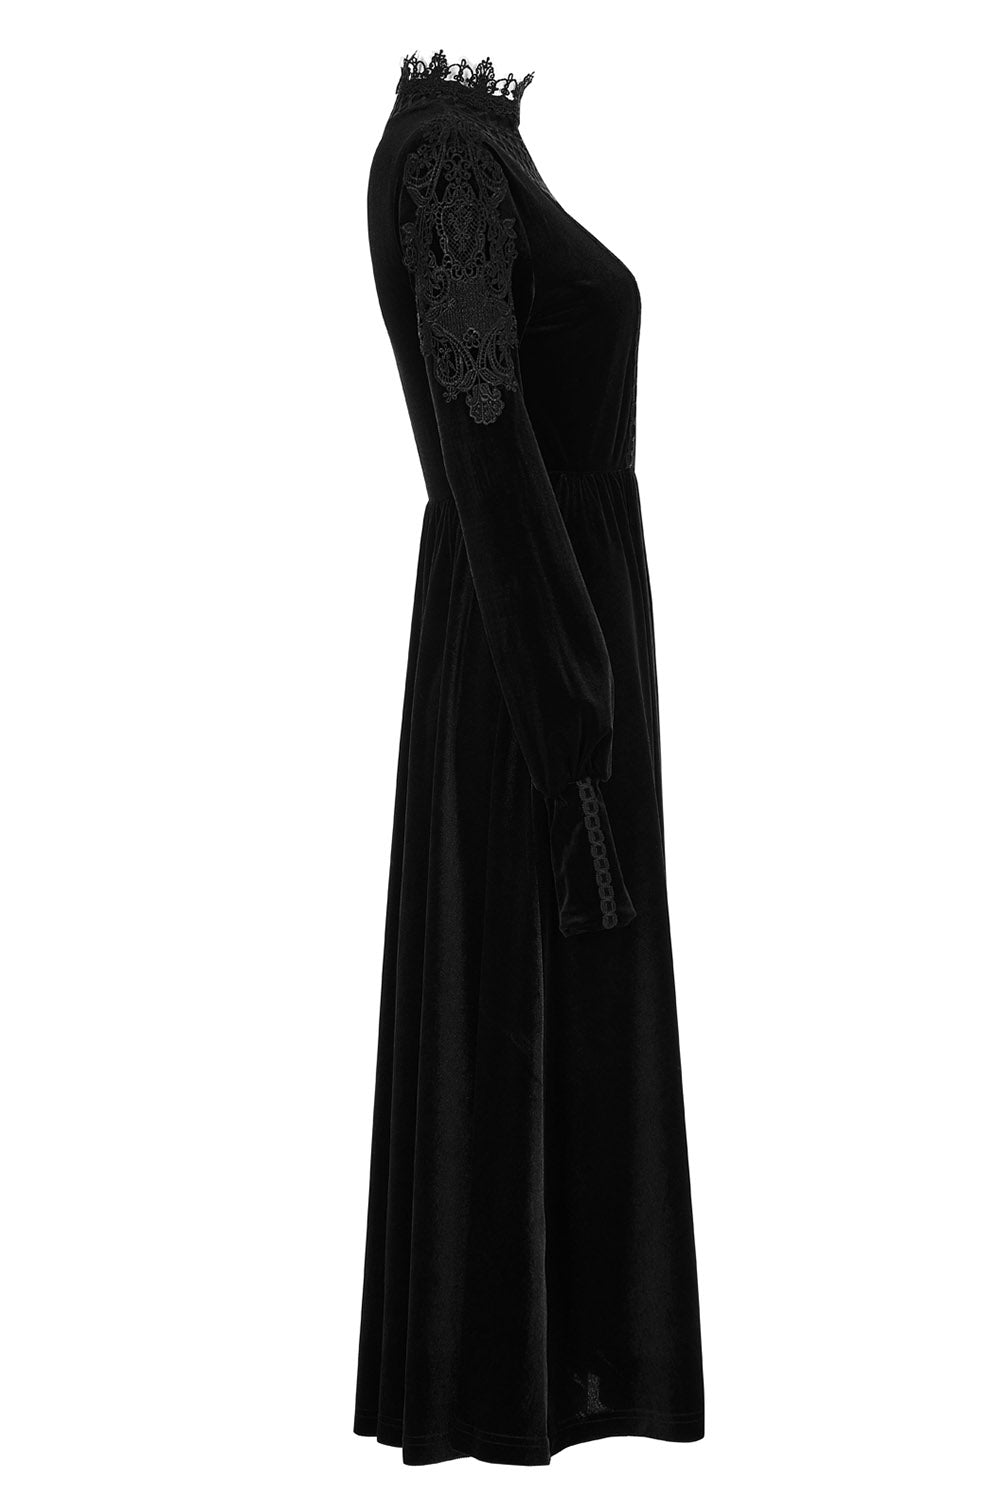 womens gothic embroidered dress